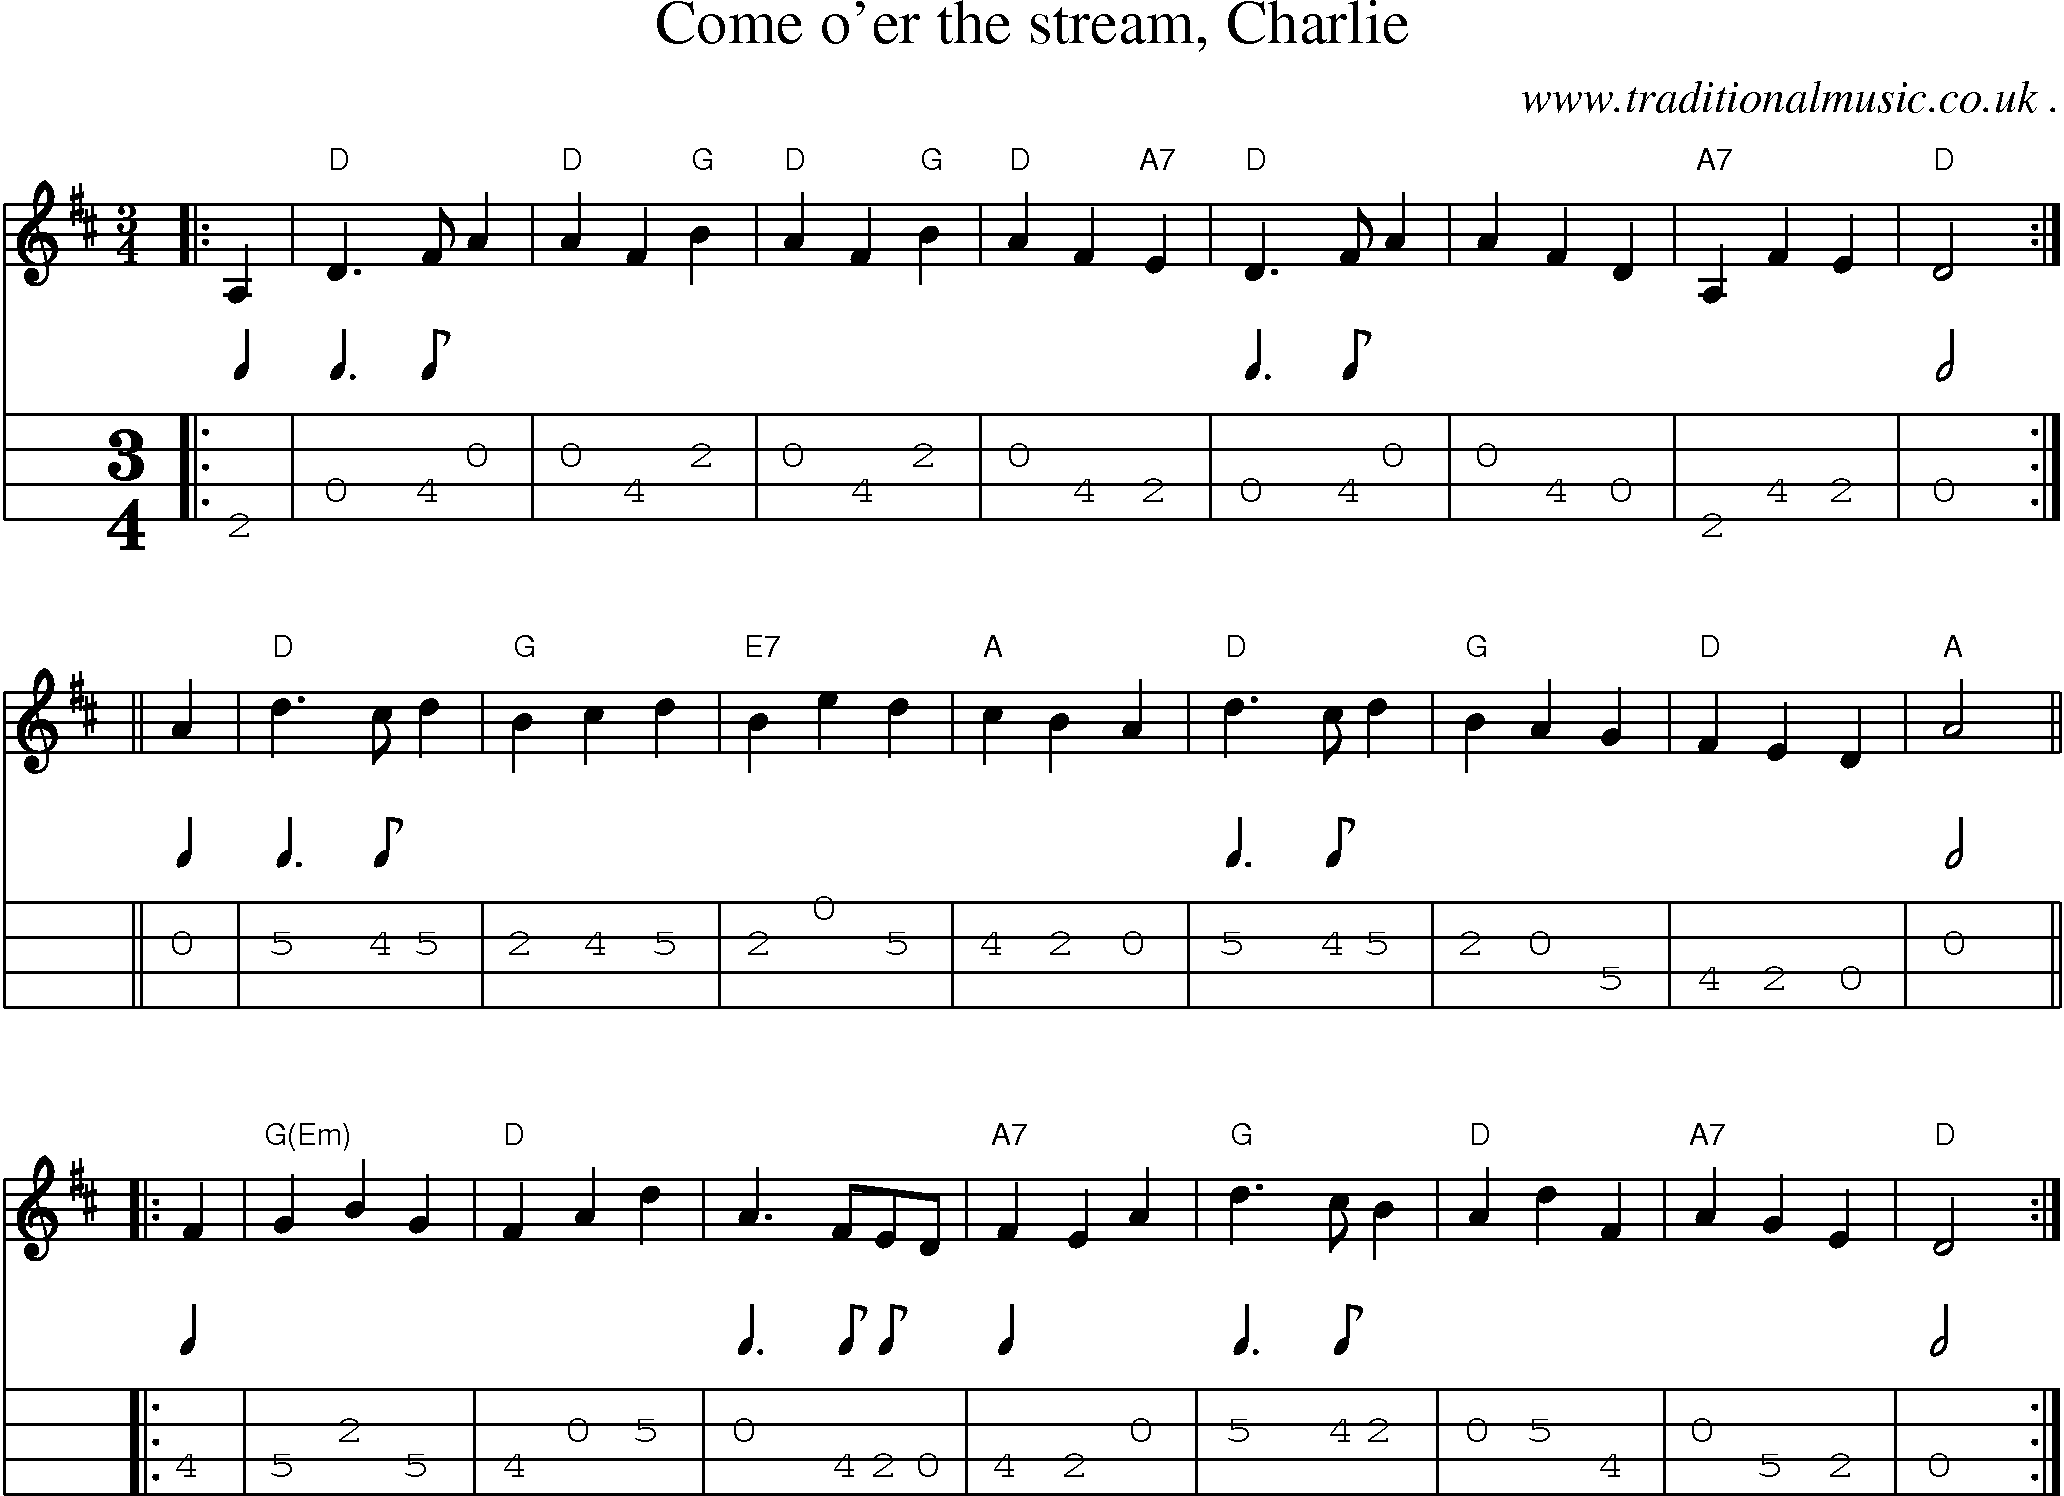 Sheet-music  score, Chords and Mandolin Tabs for Come Oer The Stream Charlie